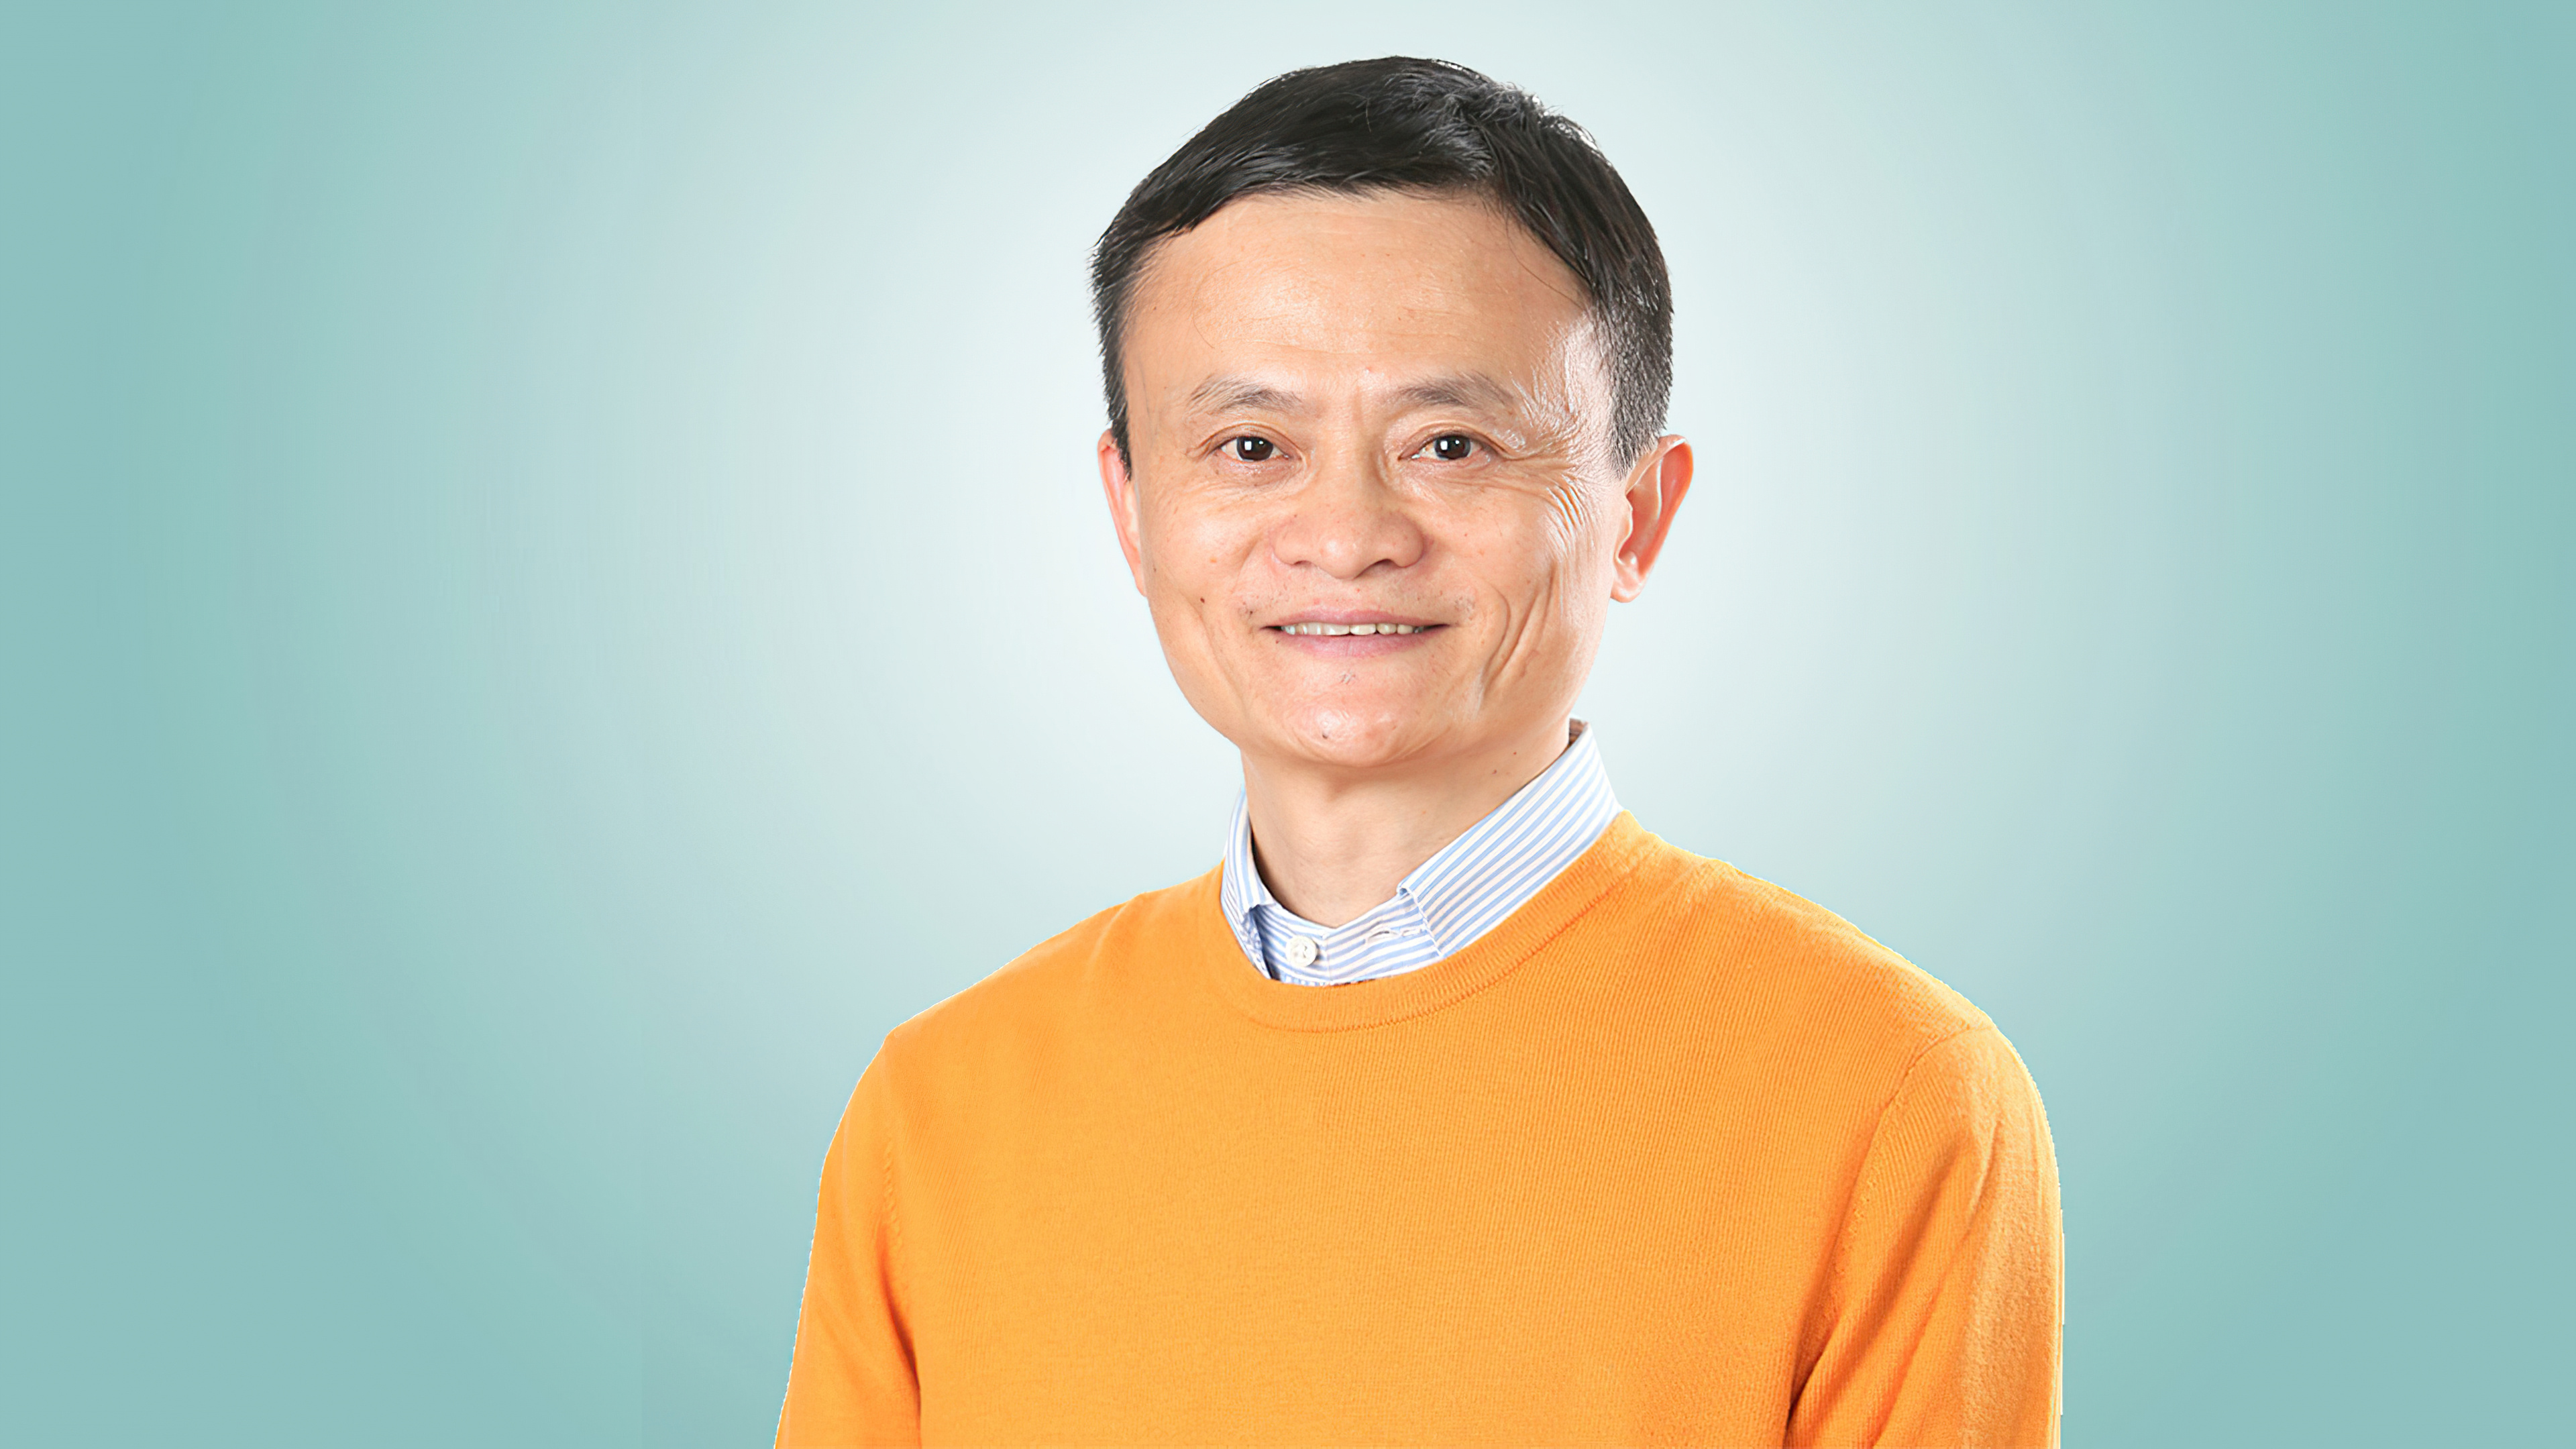 Alibaba Group: Jack Ma, The co-founder and former executive chairman, A Chinese business magnate. 3840x2160 4K Wallpaper.